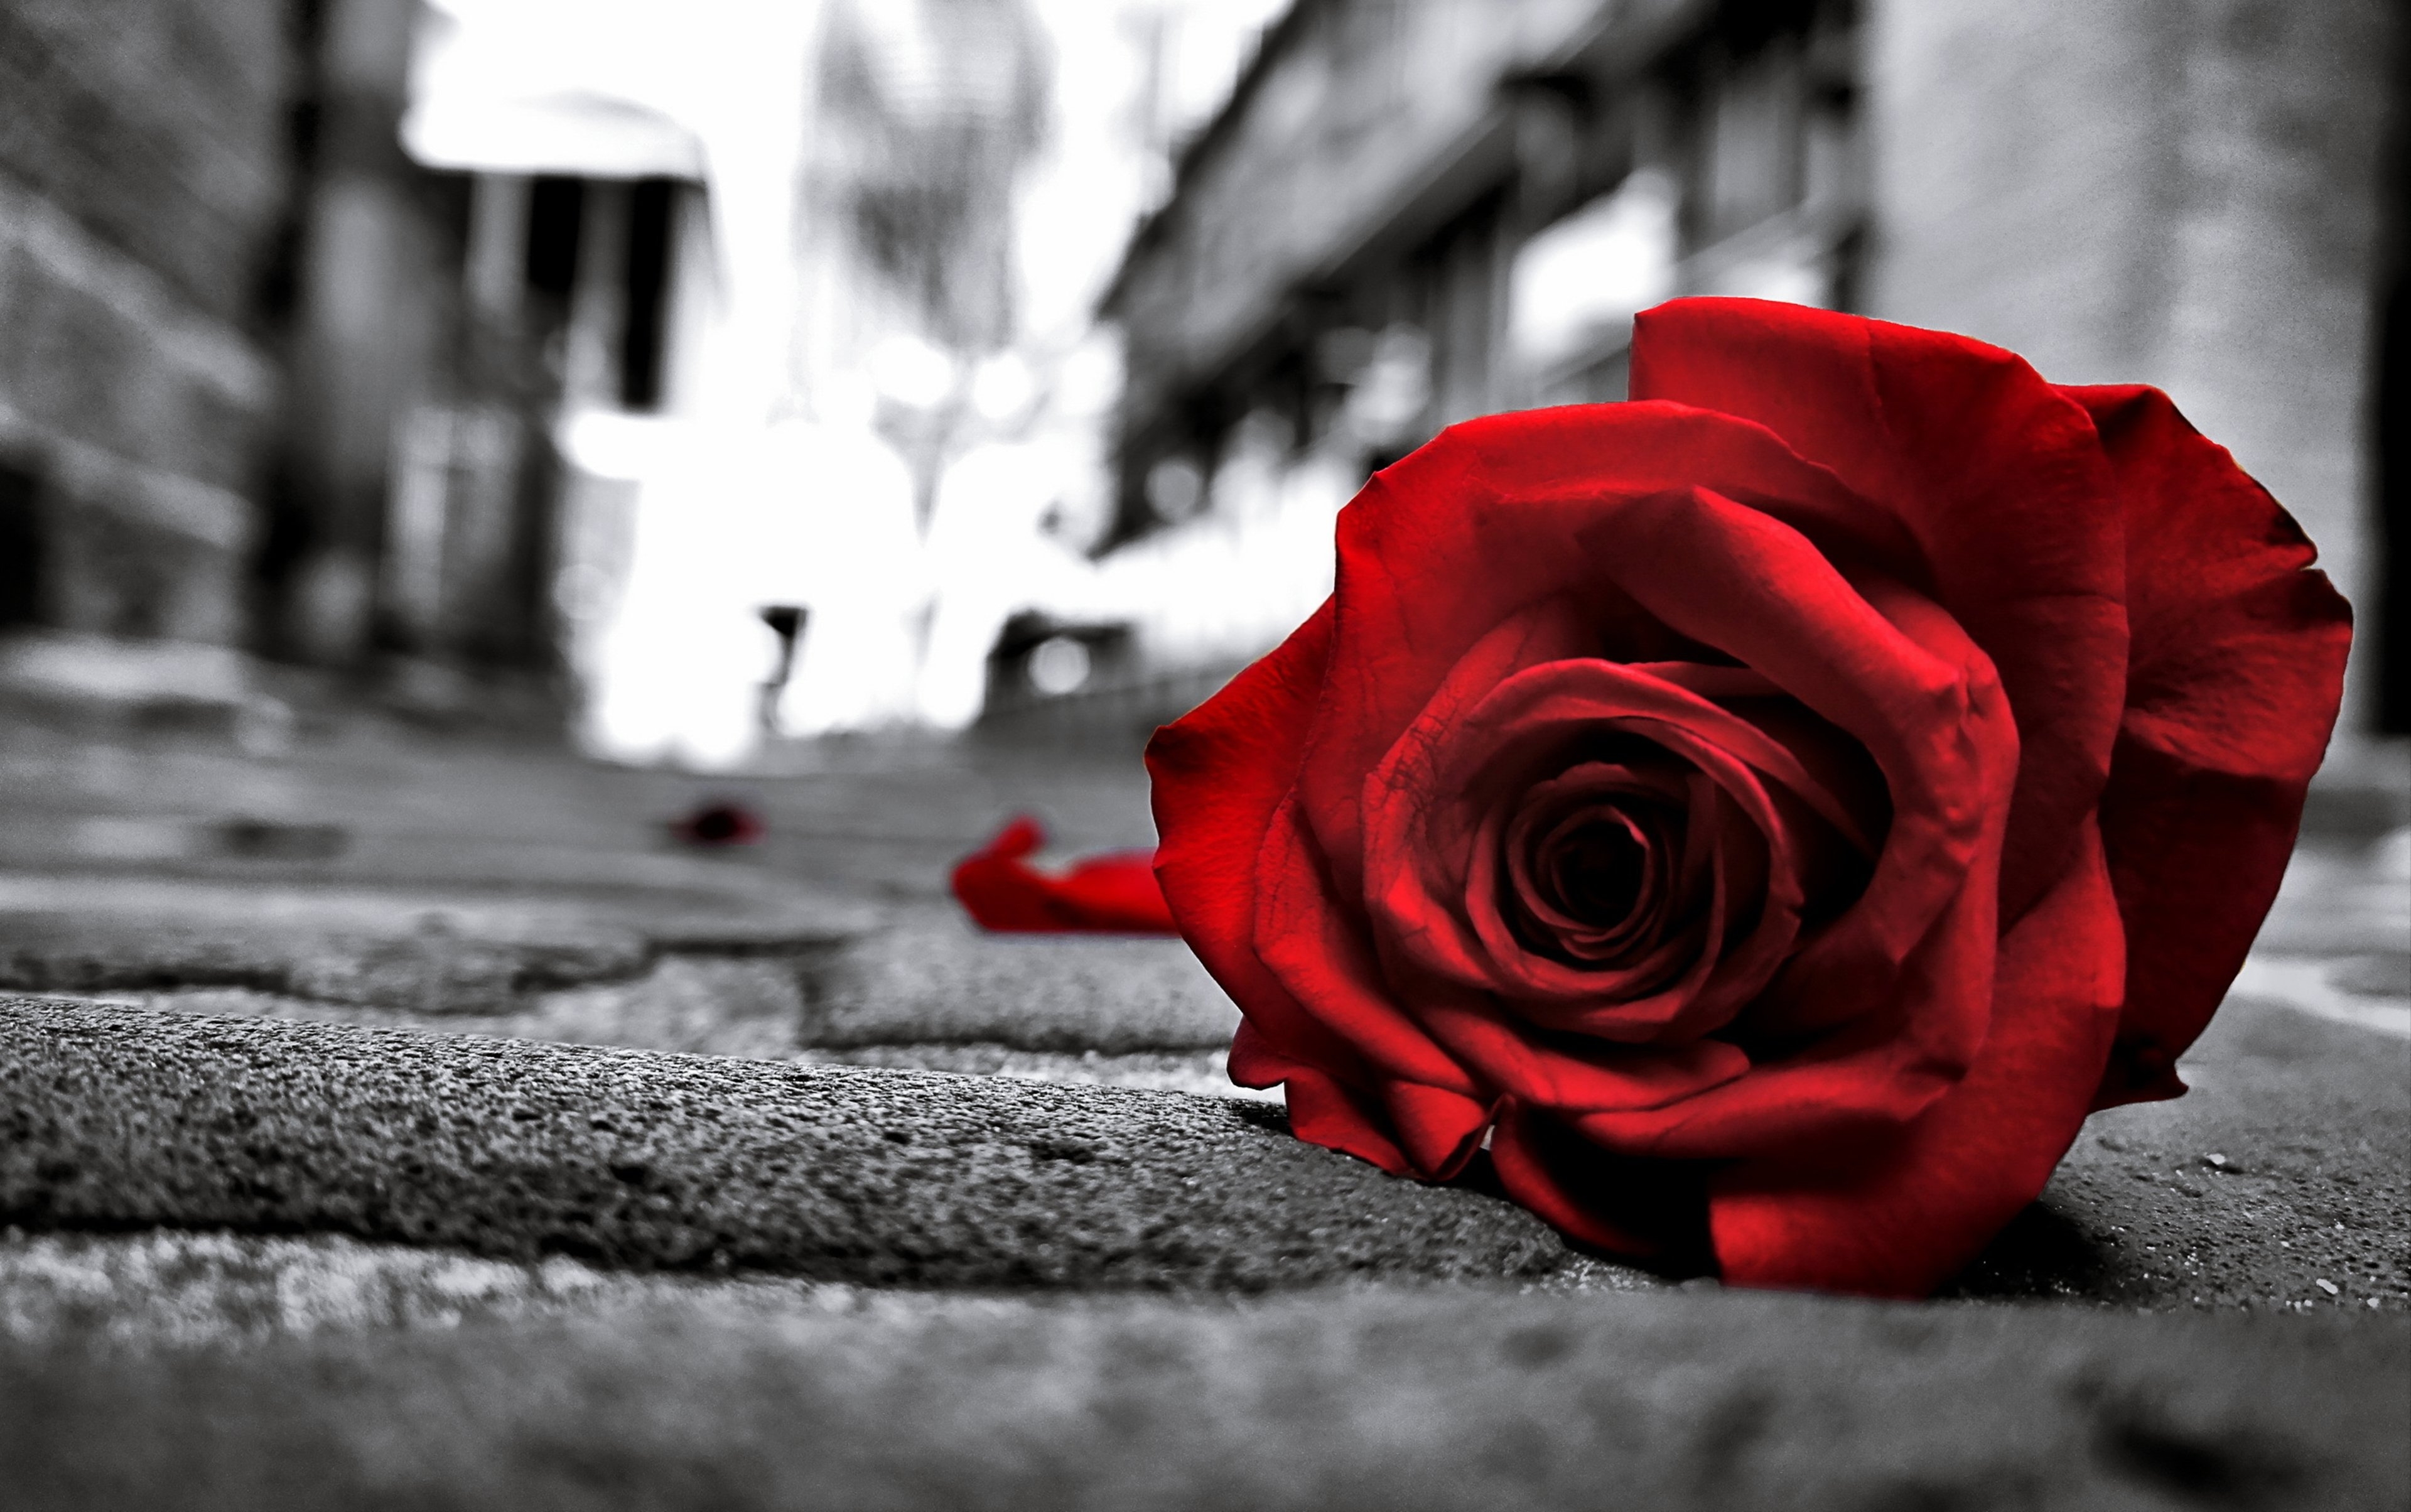 Abandoned red rose in a monochrome photo